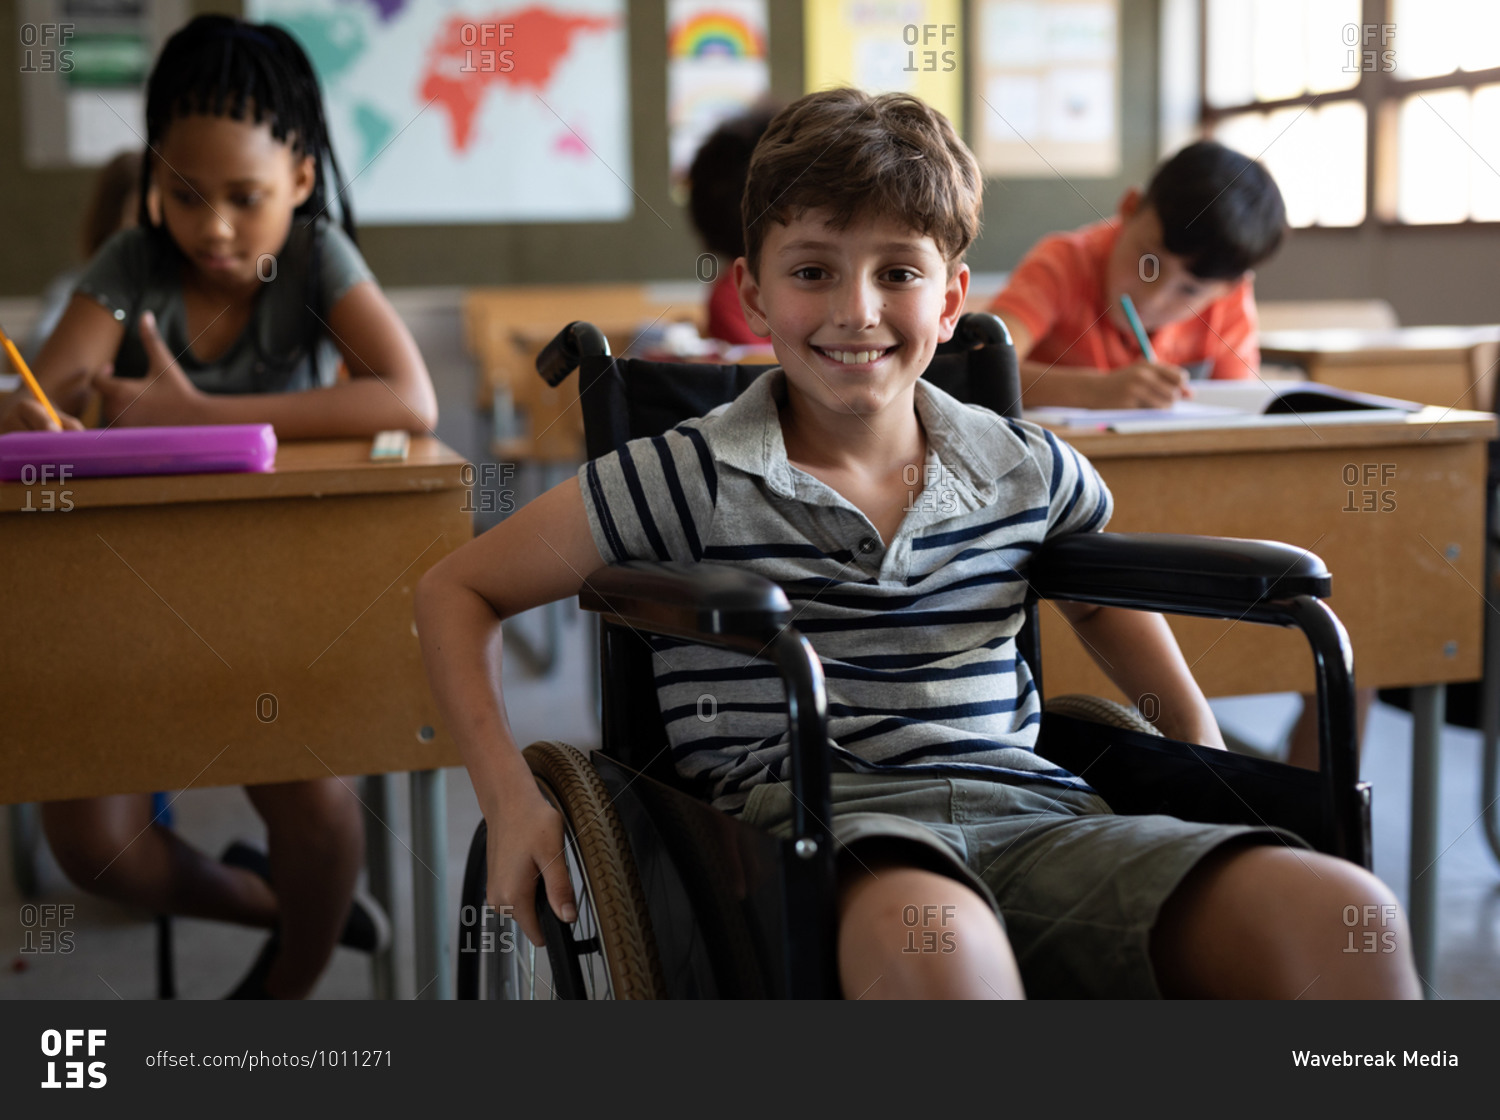 Portrait of disable Caucasian boy sitting in his wheelchair in the classroom during the lesson.  Primary education social distancing health safety during Covid19 Coronavirus pandemic.